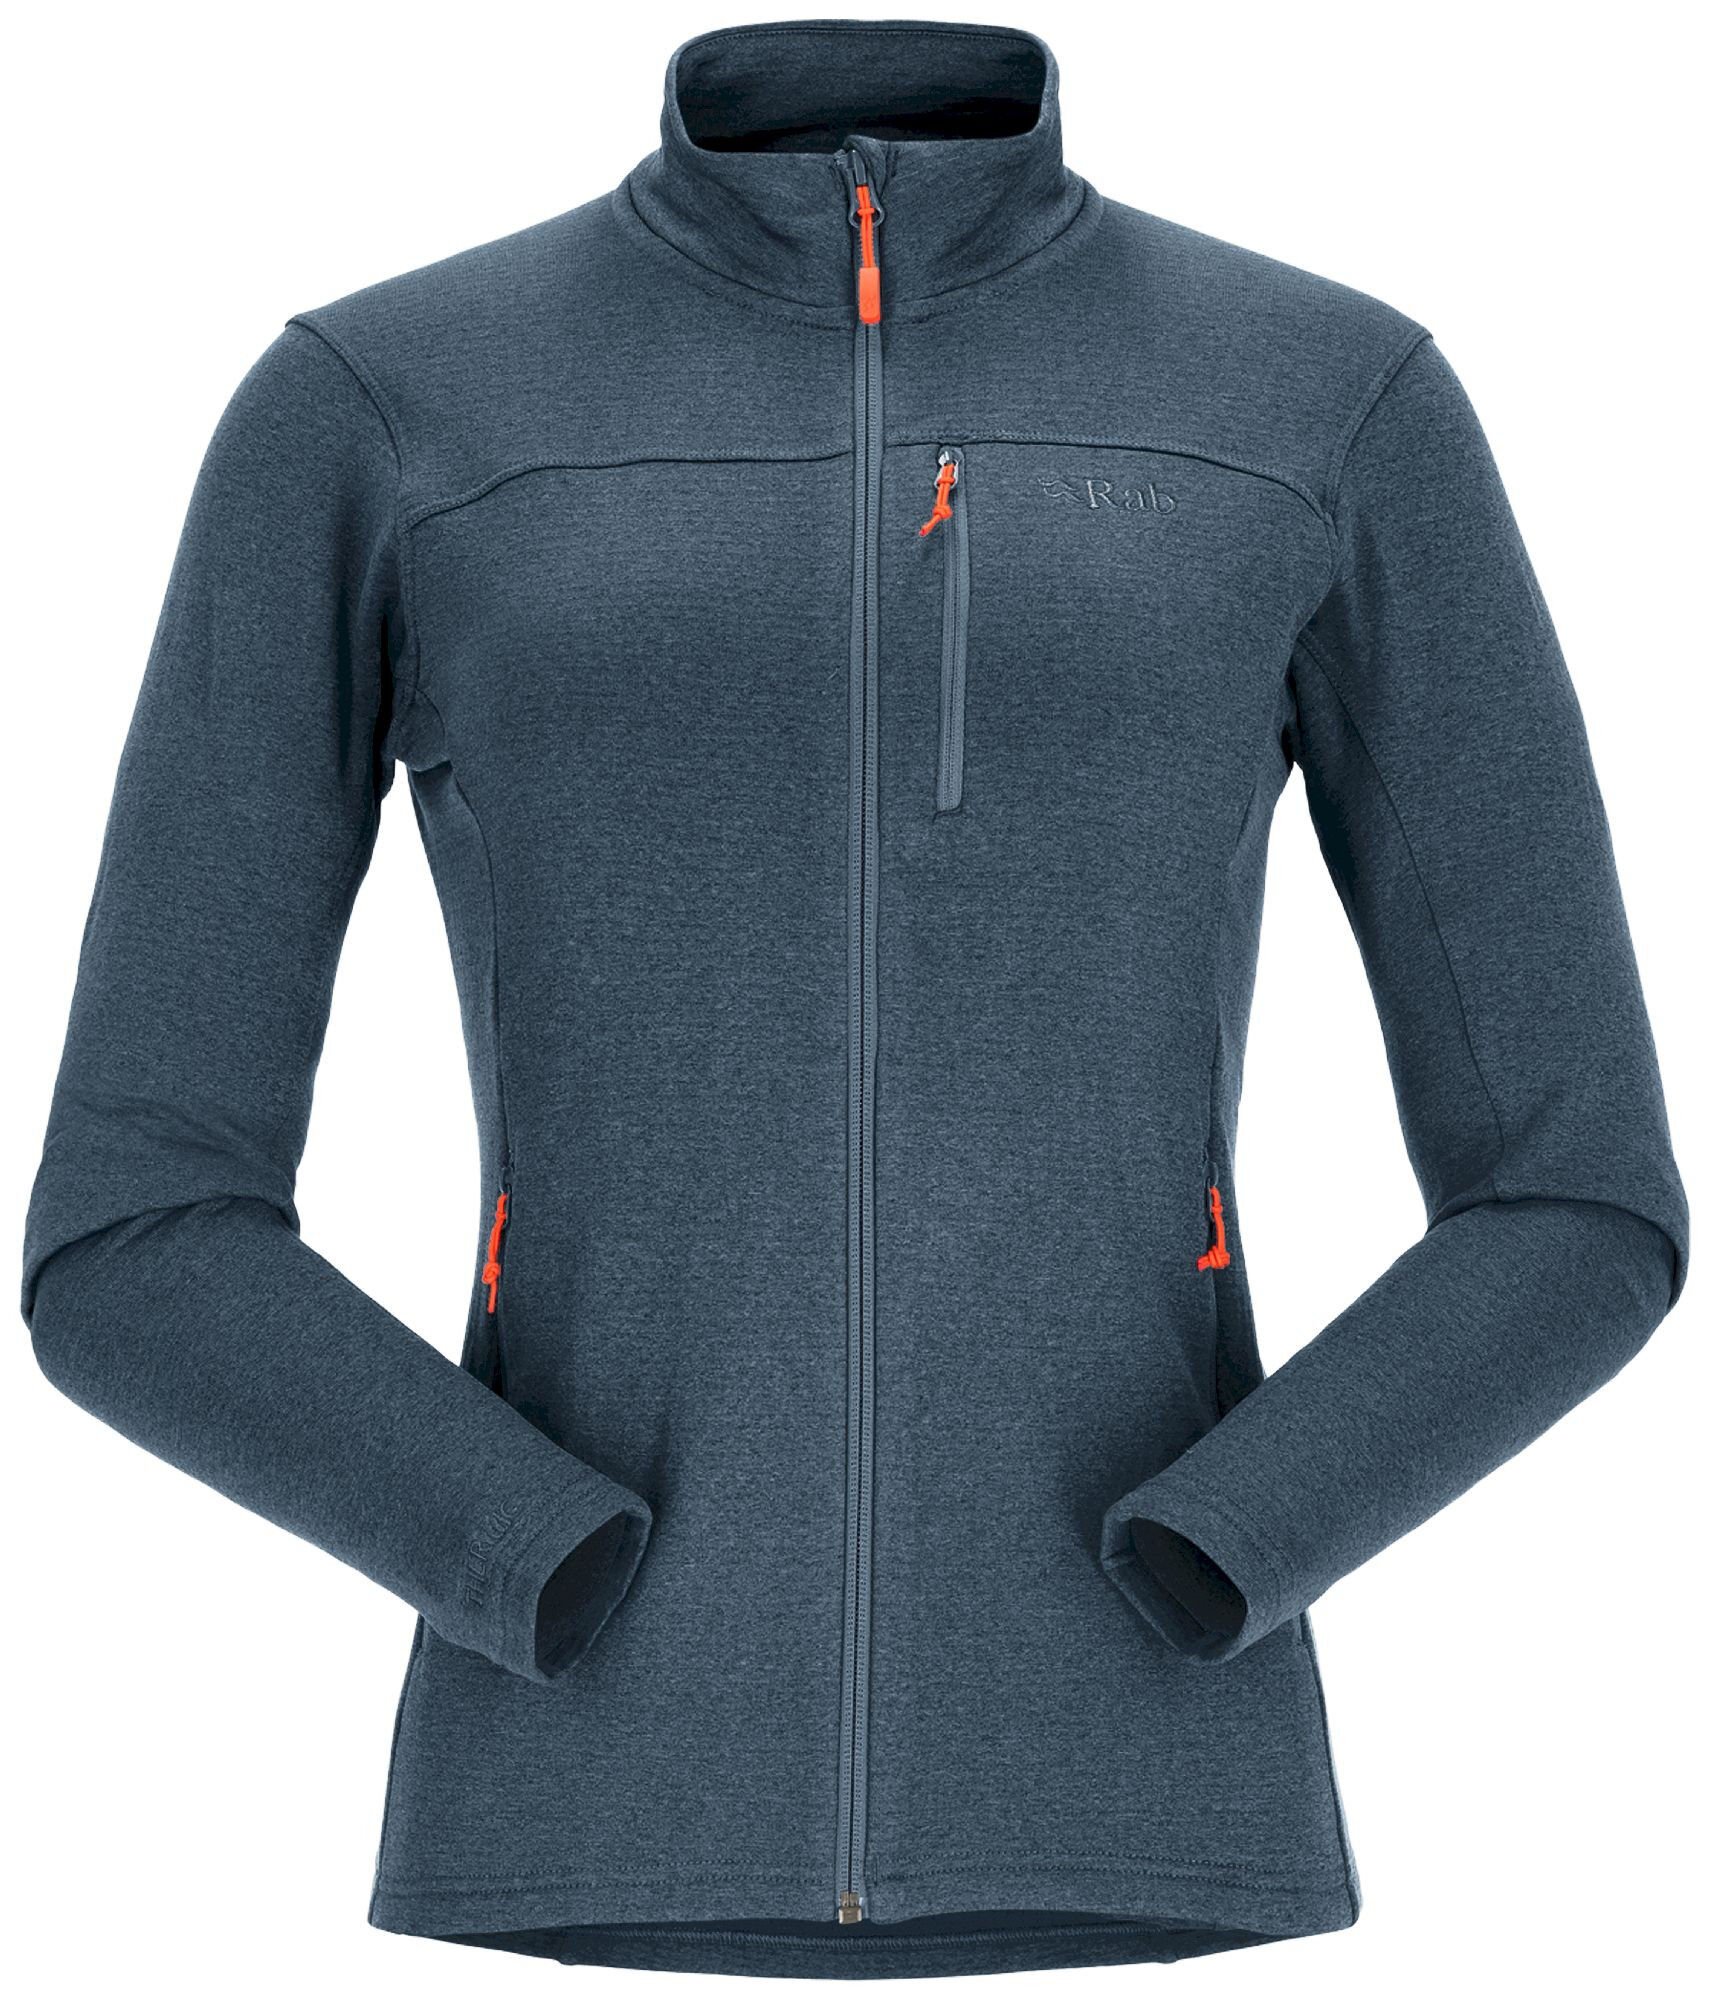 Rab Women's Graviton Hoody - Giacca in pile - Donna